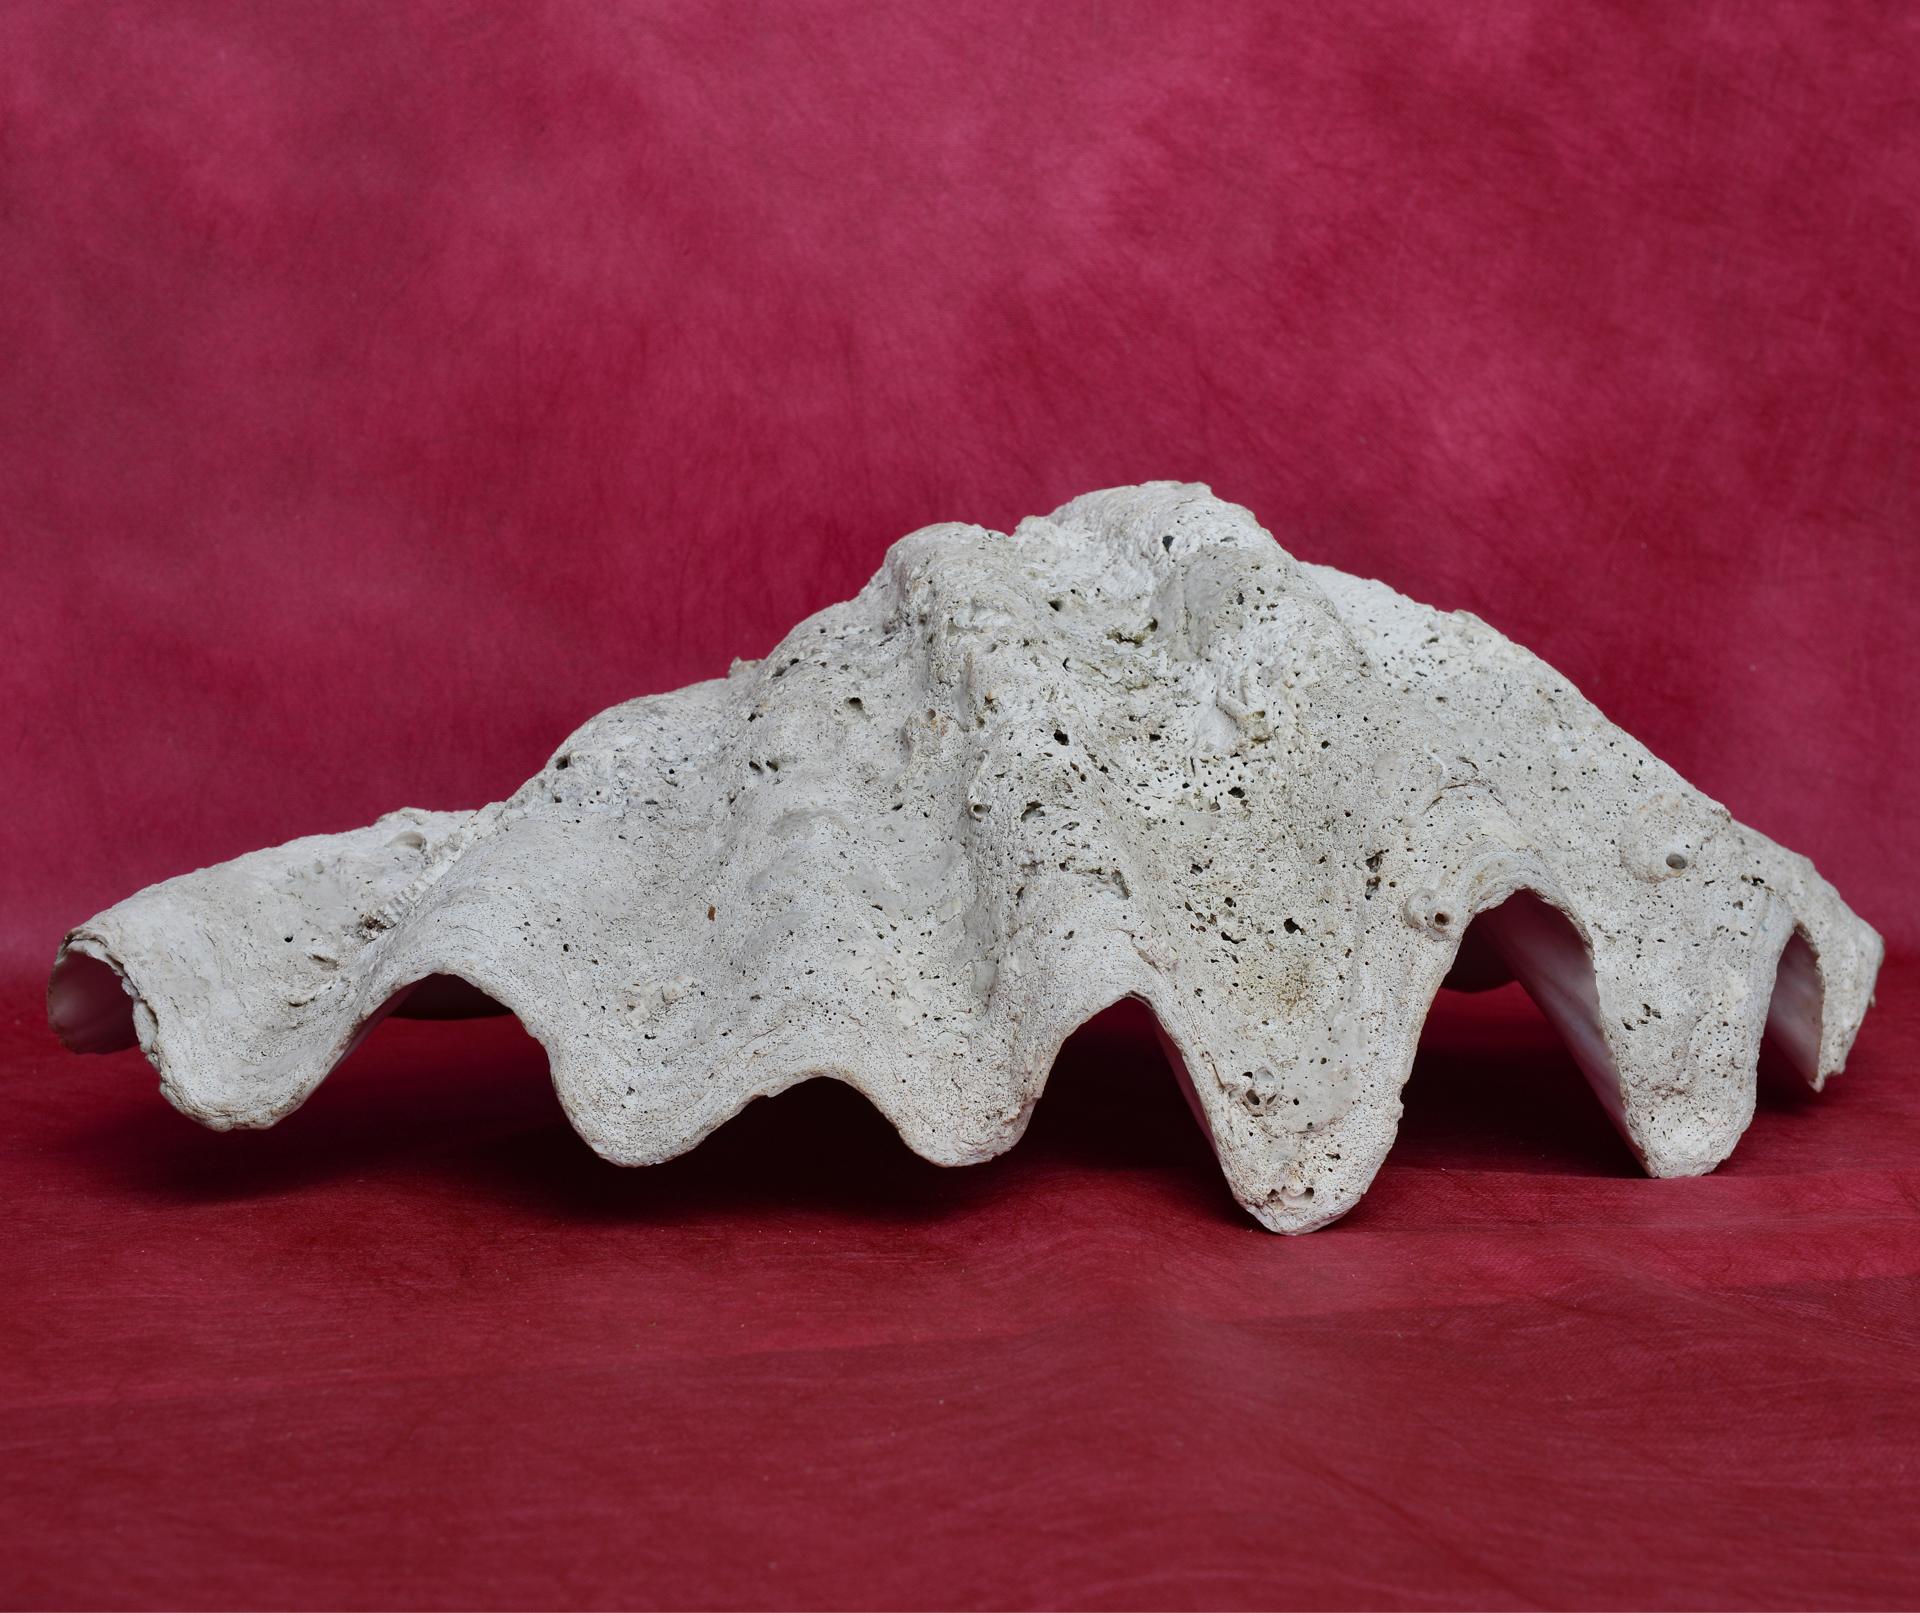 Other Big Shell Tridacna from Pacific Ocean For Sale